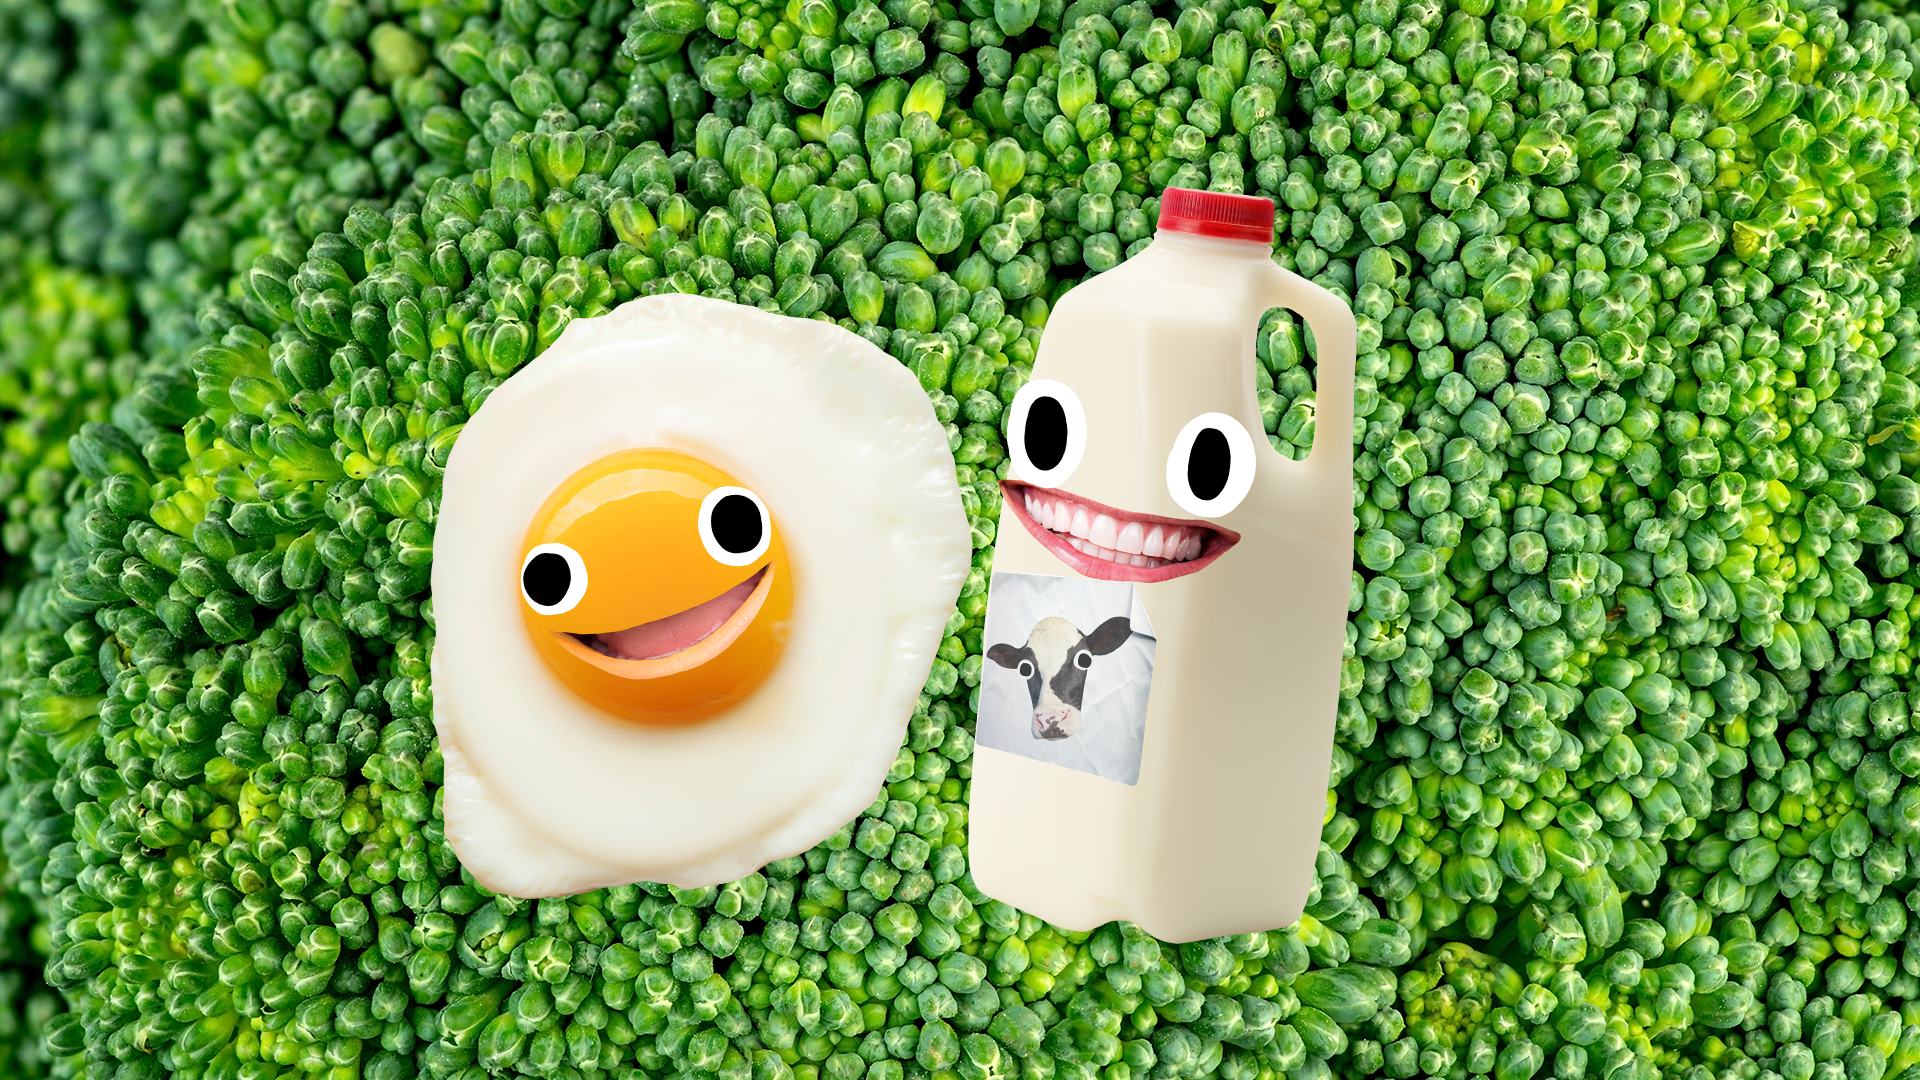 A grinning egg and pint of milk